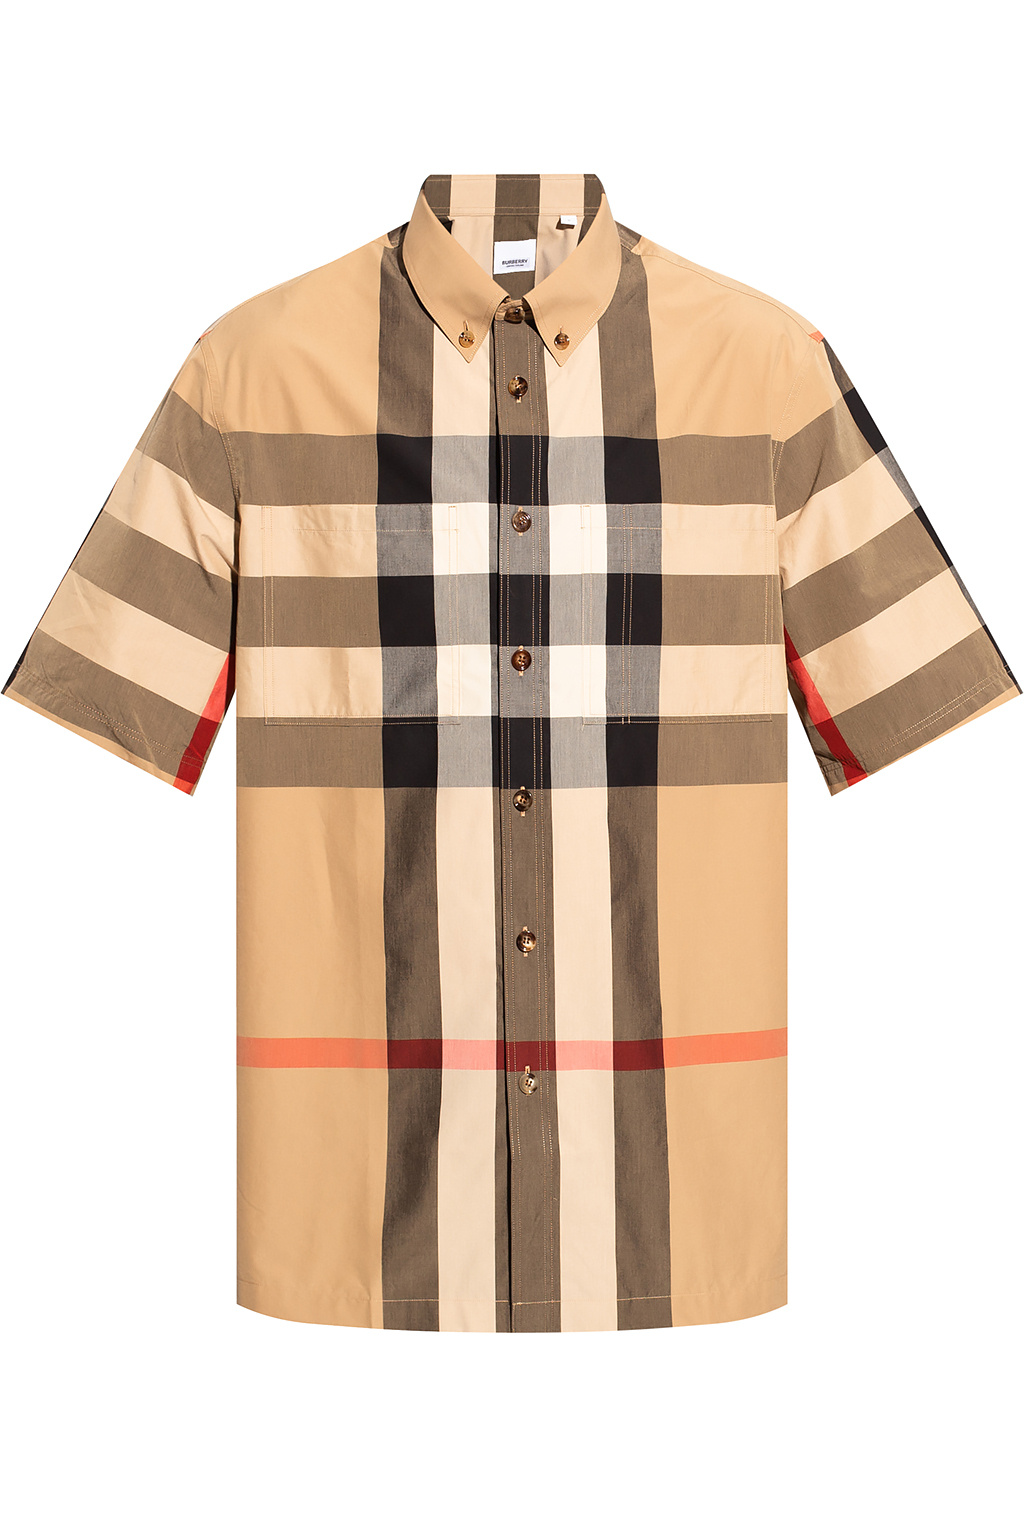 burberry shirt with shorts